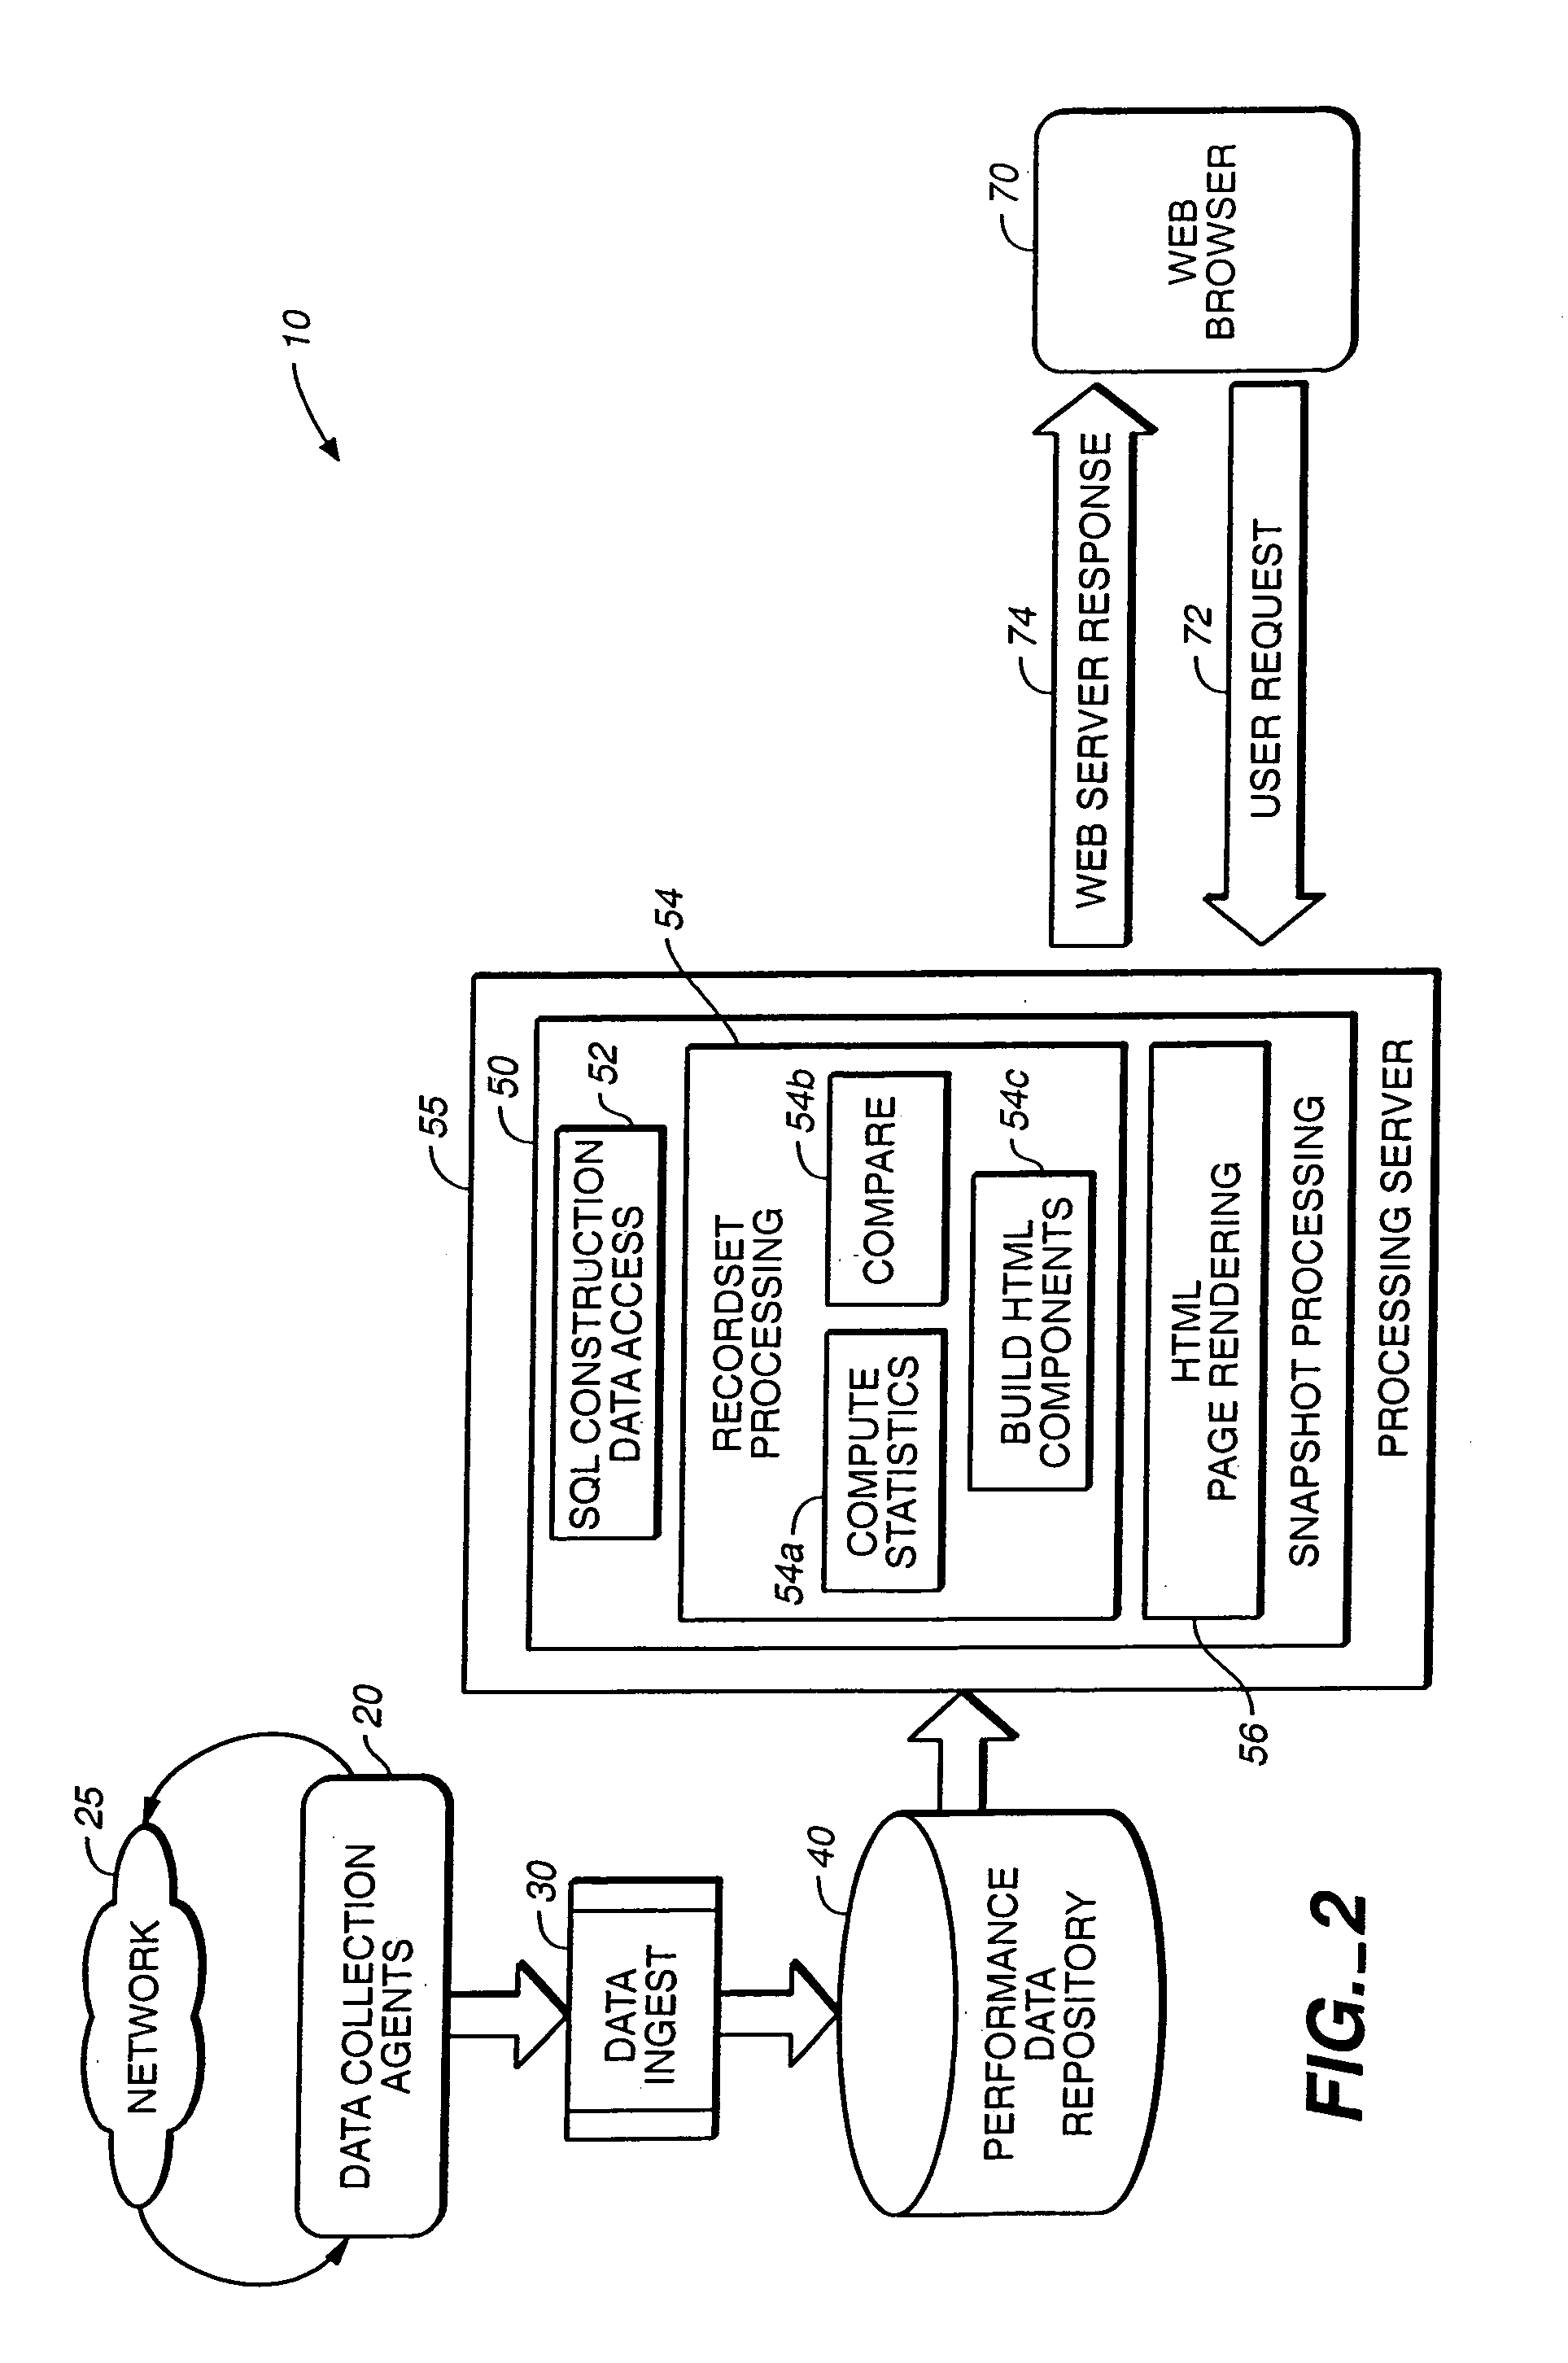 System and method for providing composite variance analysis for network operation